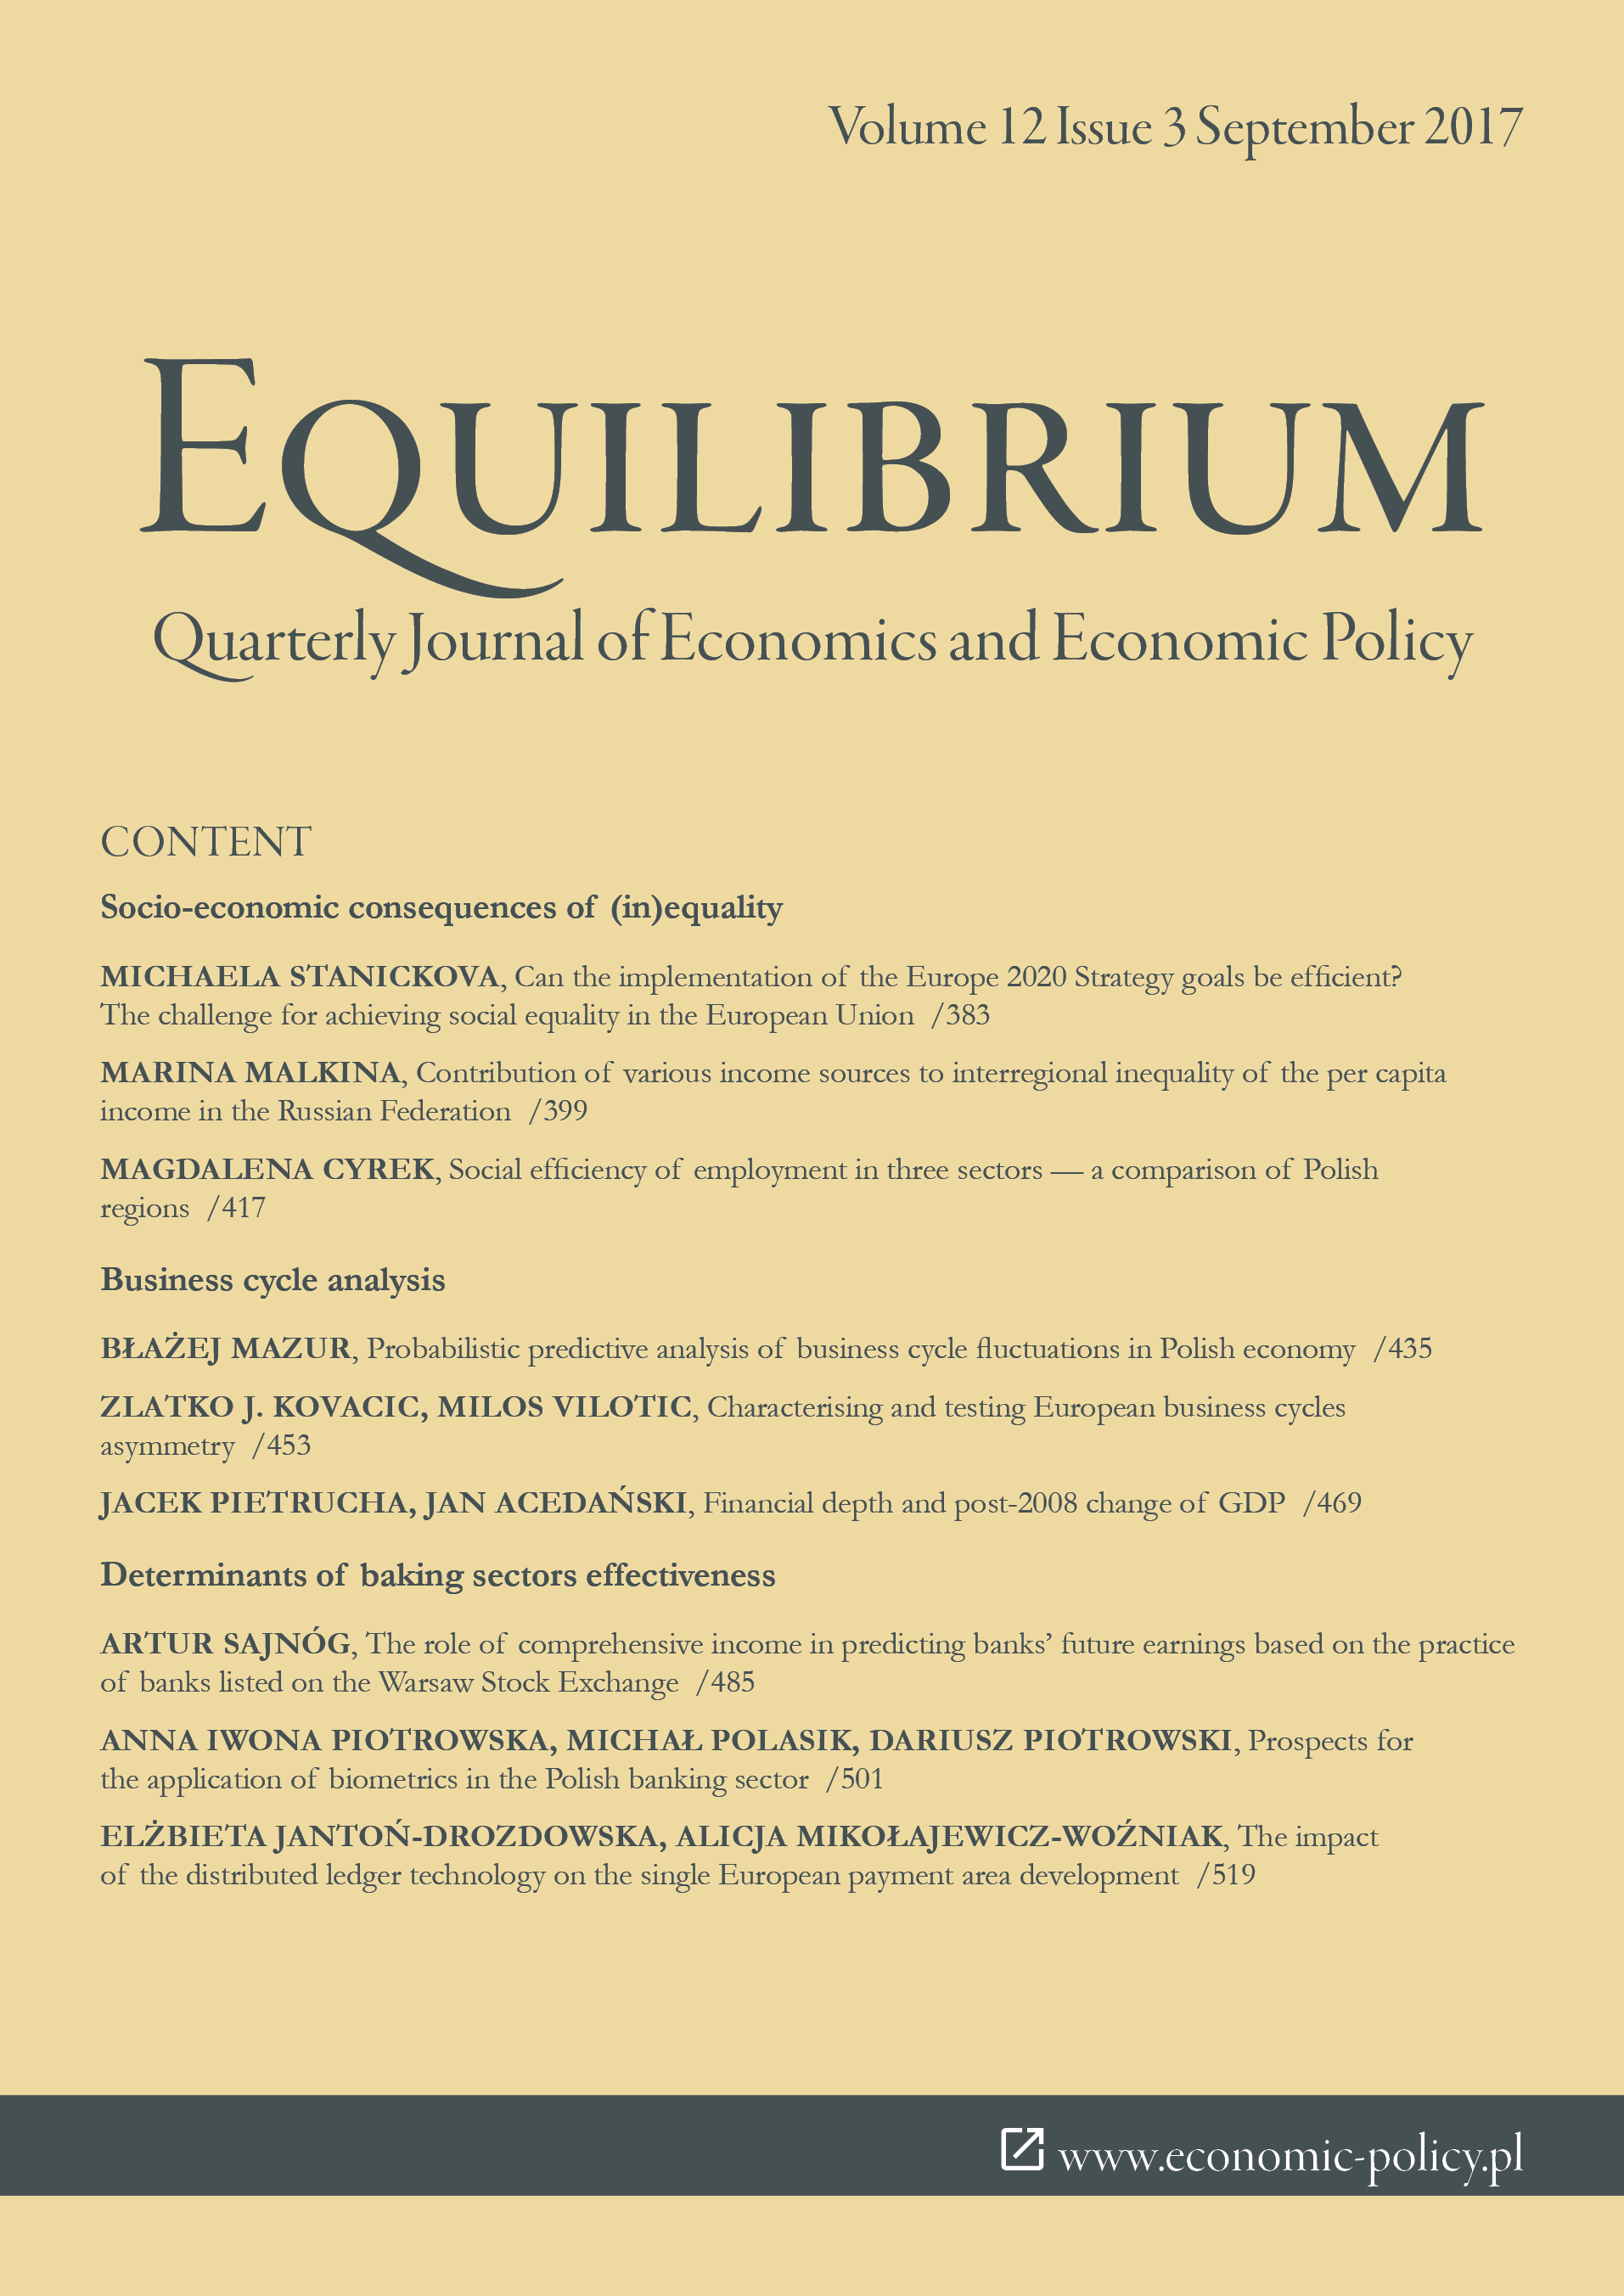 Probabilistic predictive analysis of business cycle fluctuations in Polish economy Cover Image